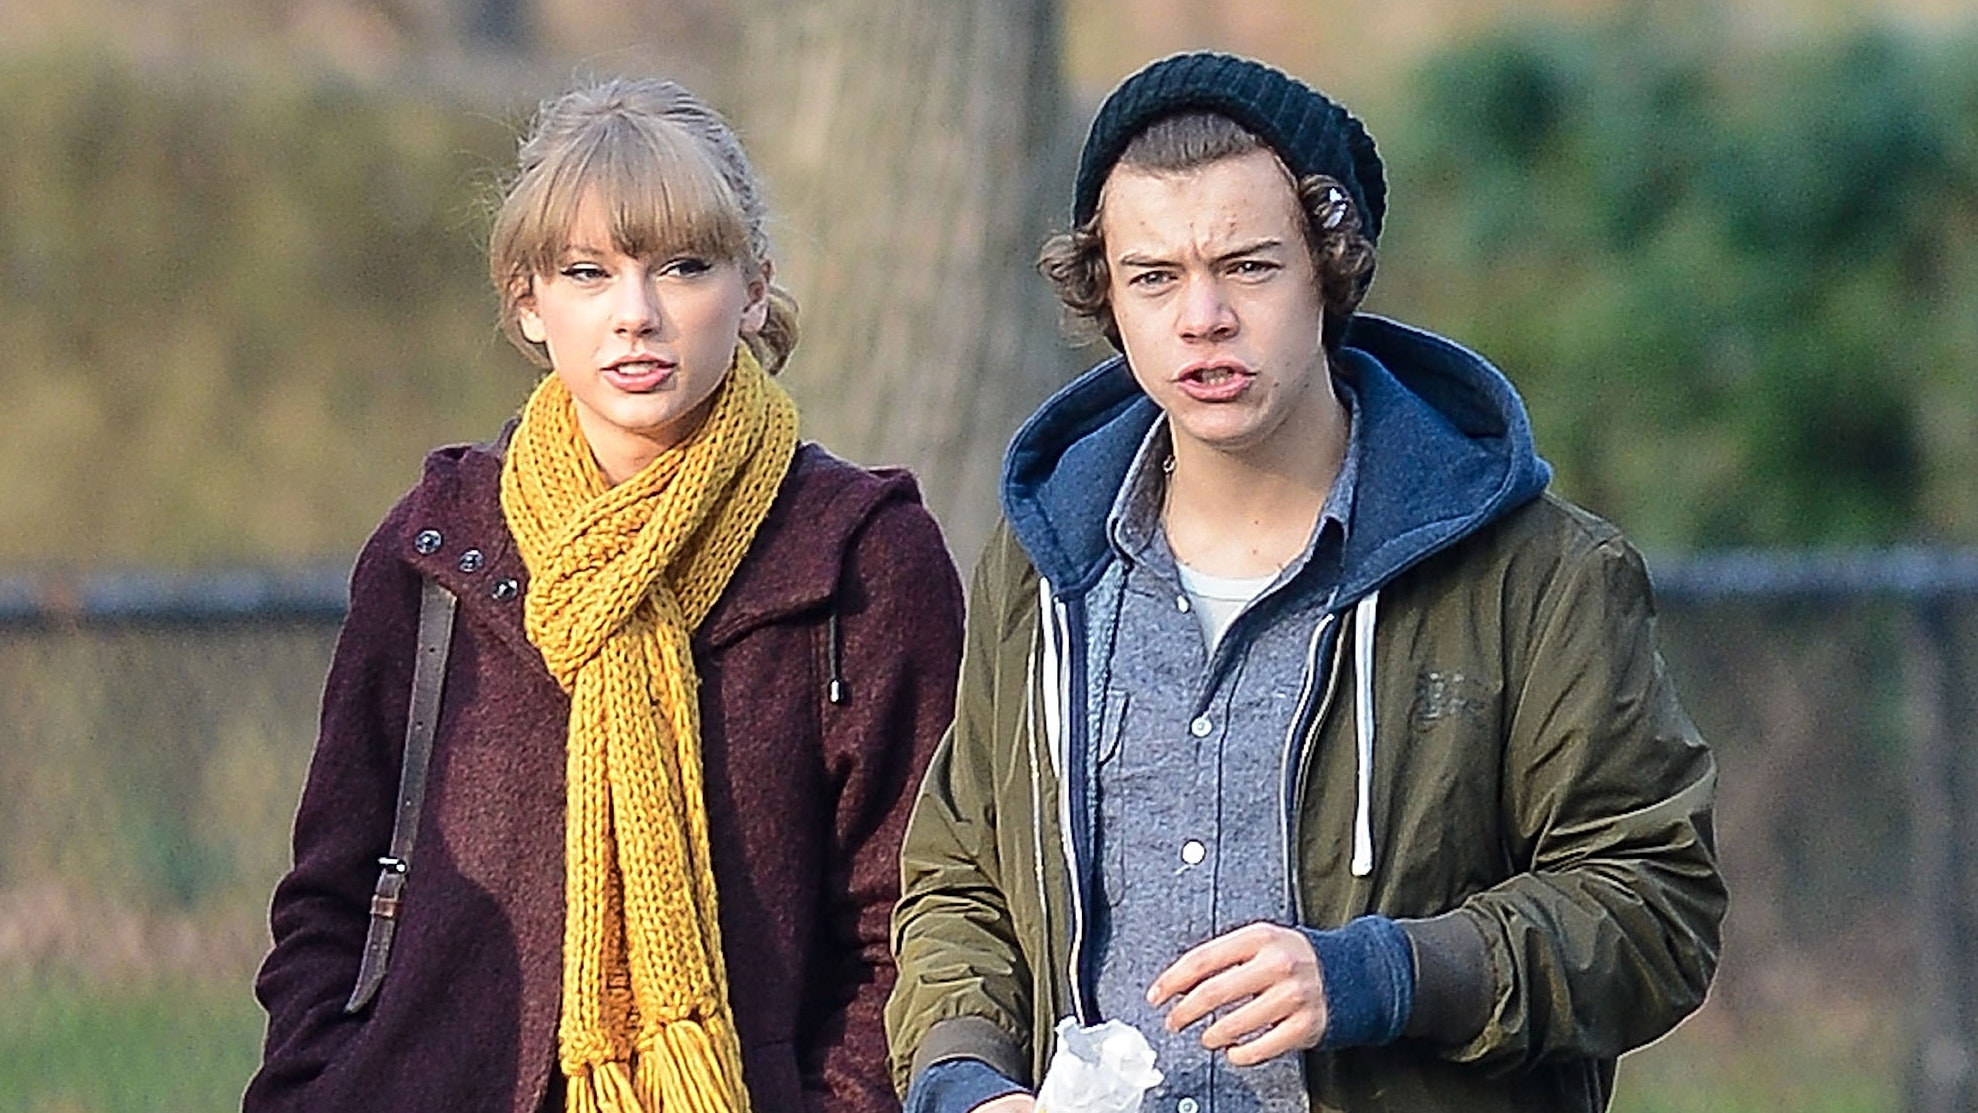 Taylor Swift and Harry Styles